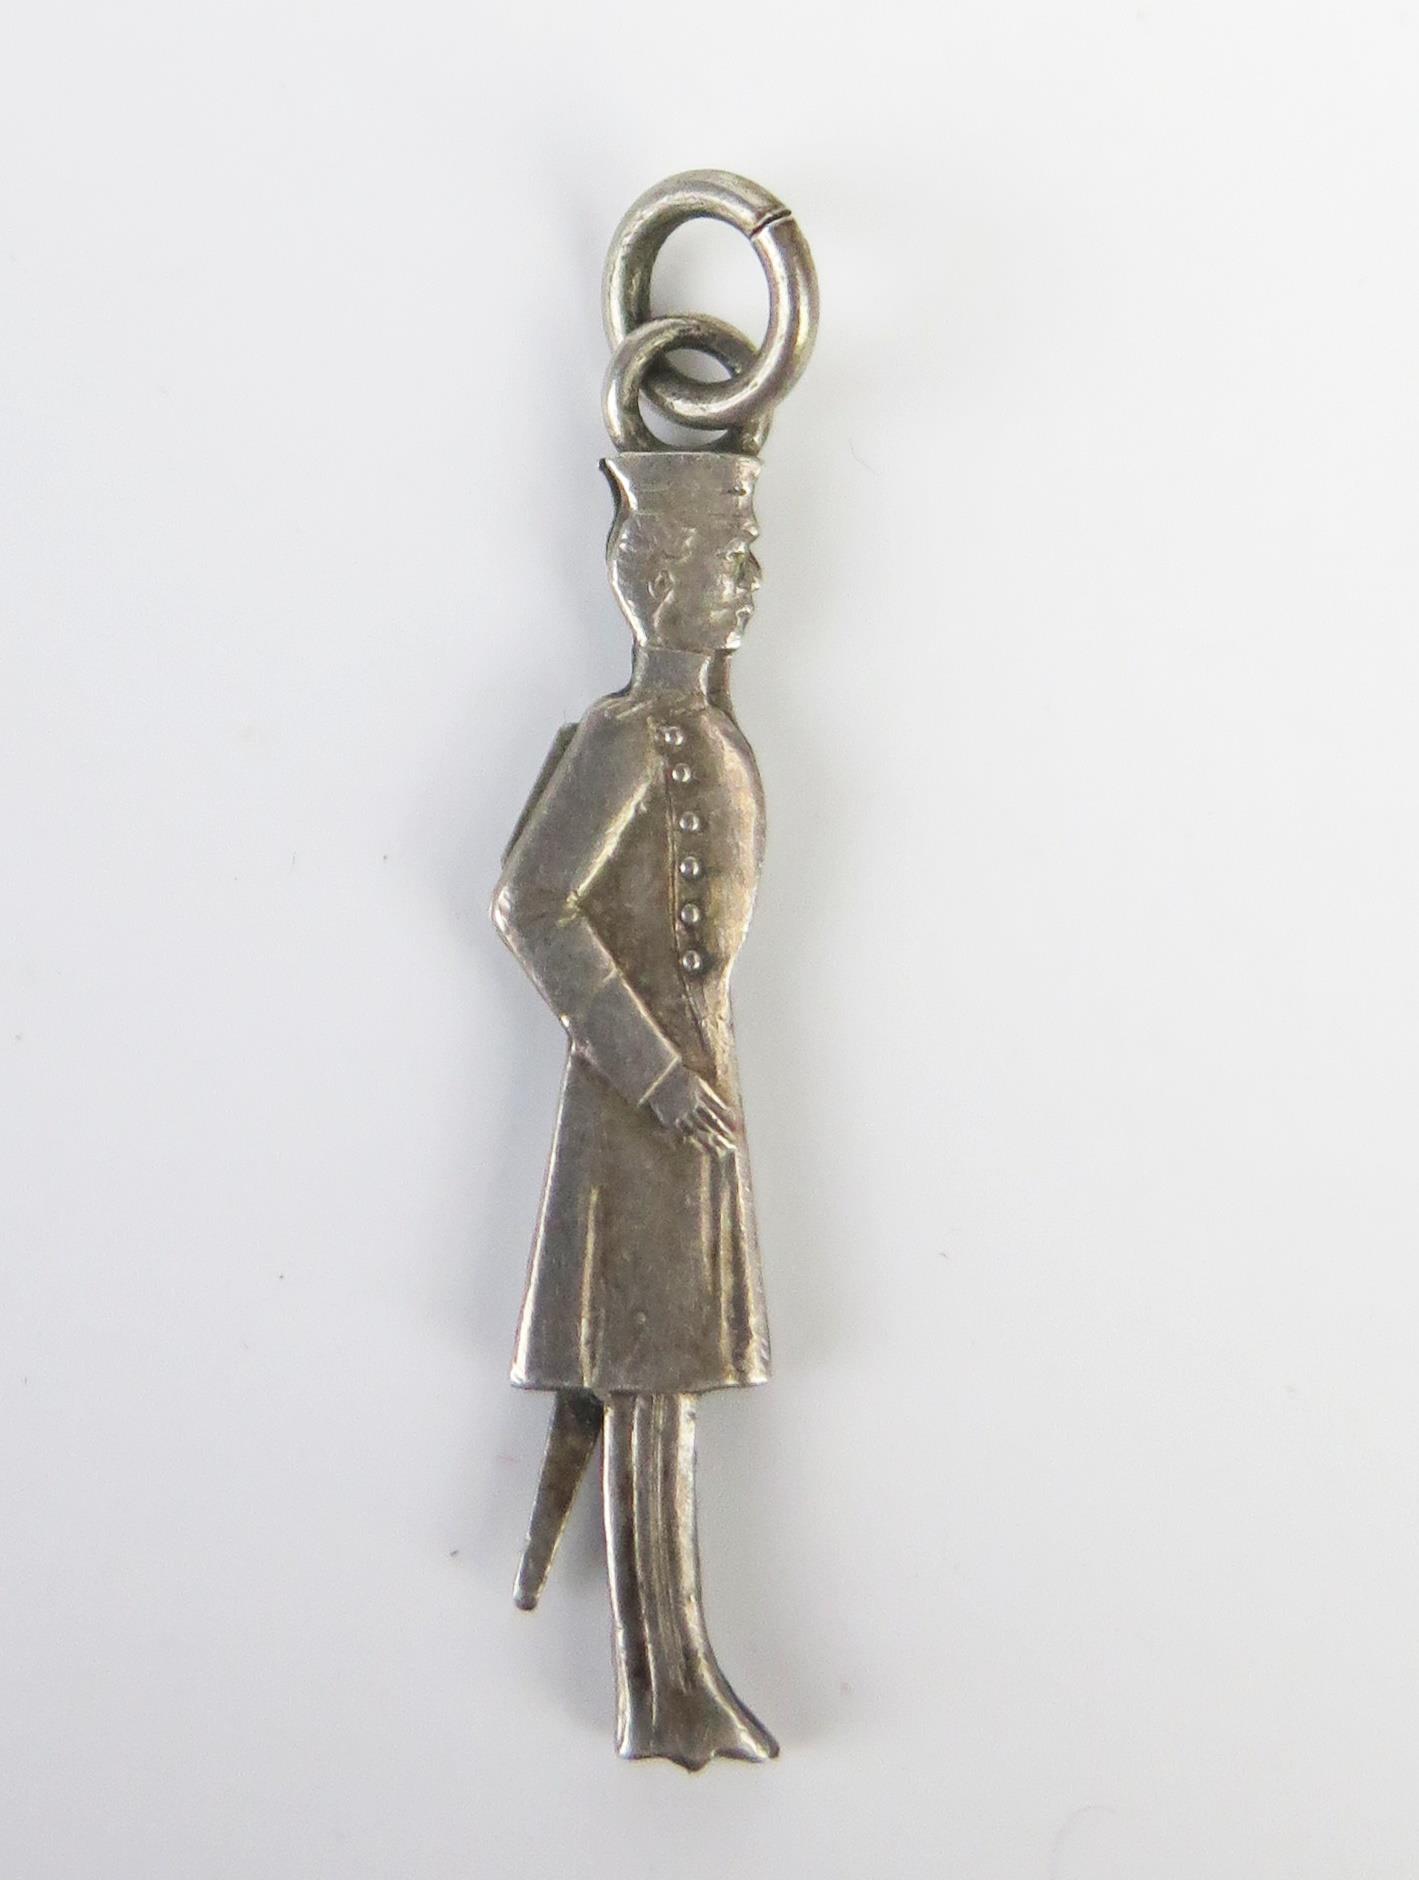 An Antique White Metal Articulated Saluting Officer Pendant, arm moves by adjusting the sword, c. - Image 3 of 3